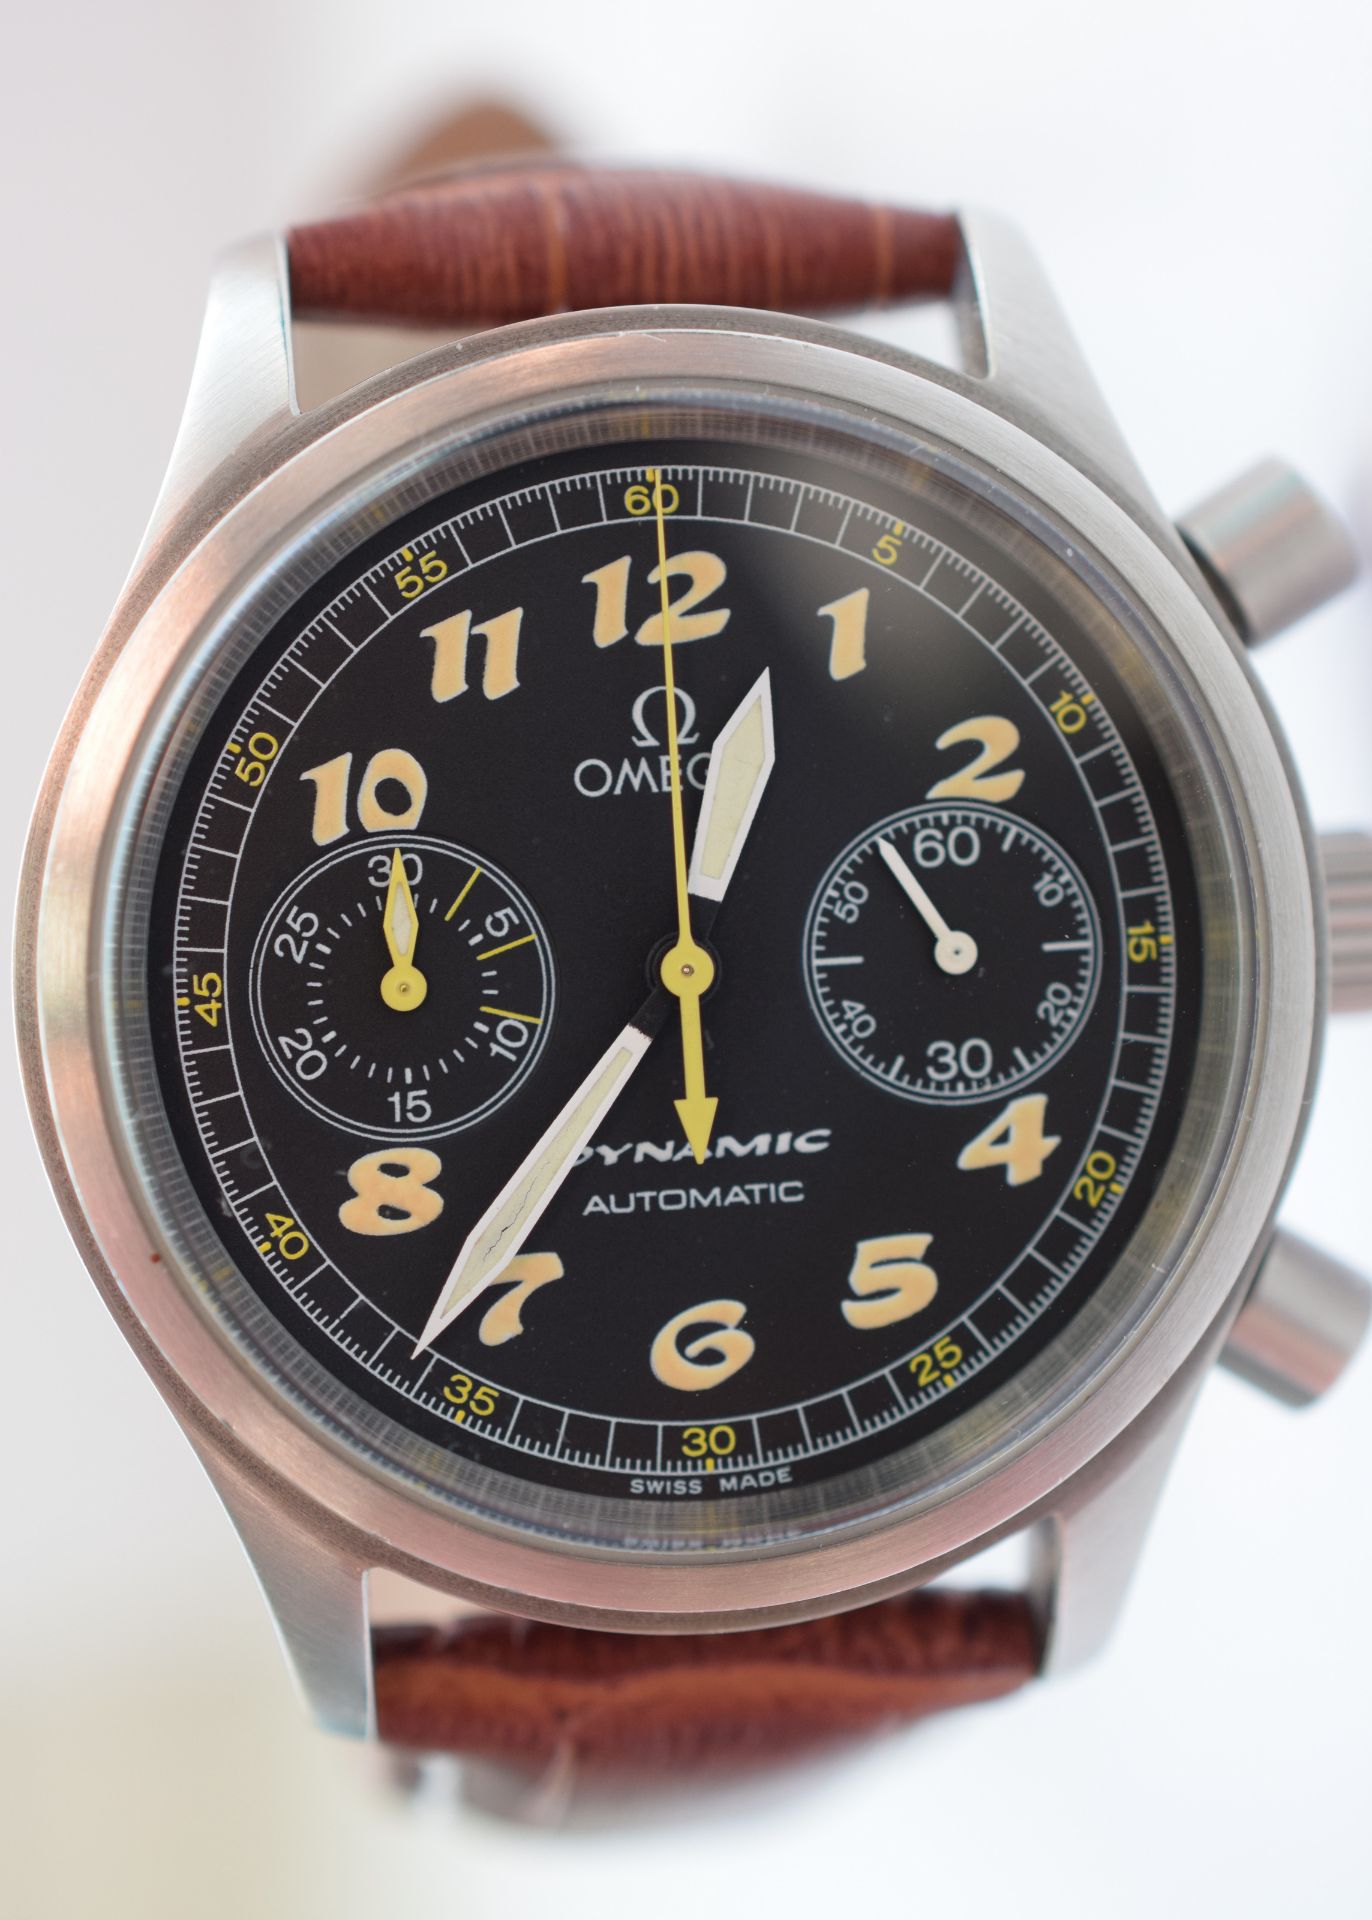 Omega Dynamic Chronograph c1999 Model 5240.50 ***RESERVE LOWERED*** - Image 7 of 9